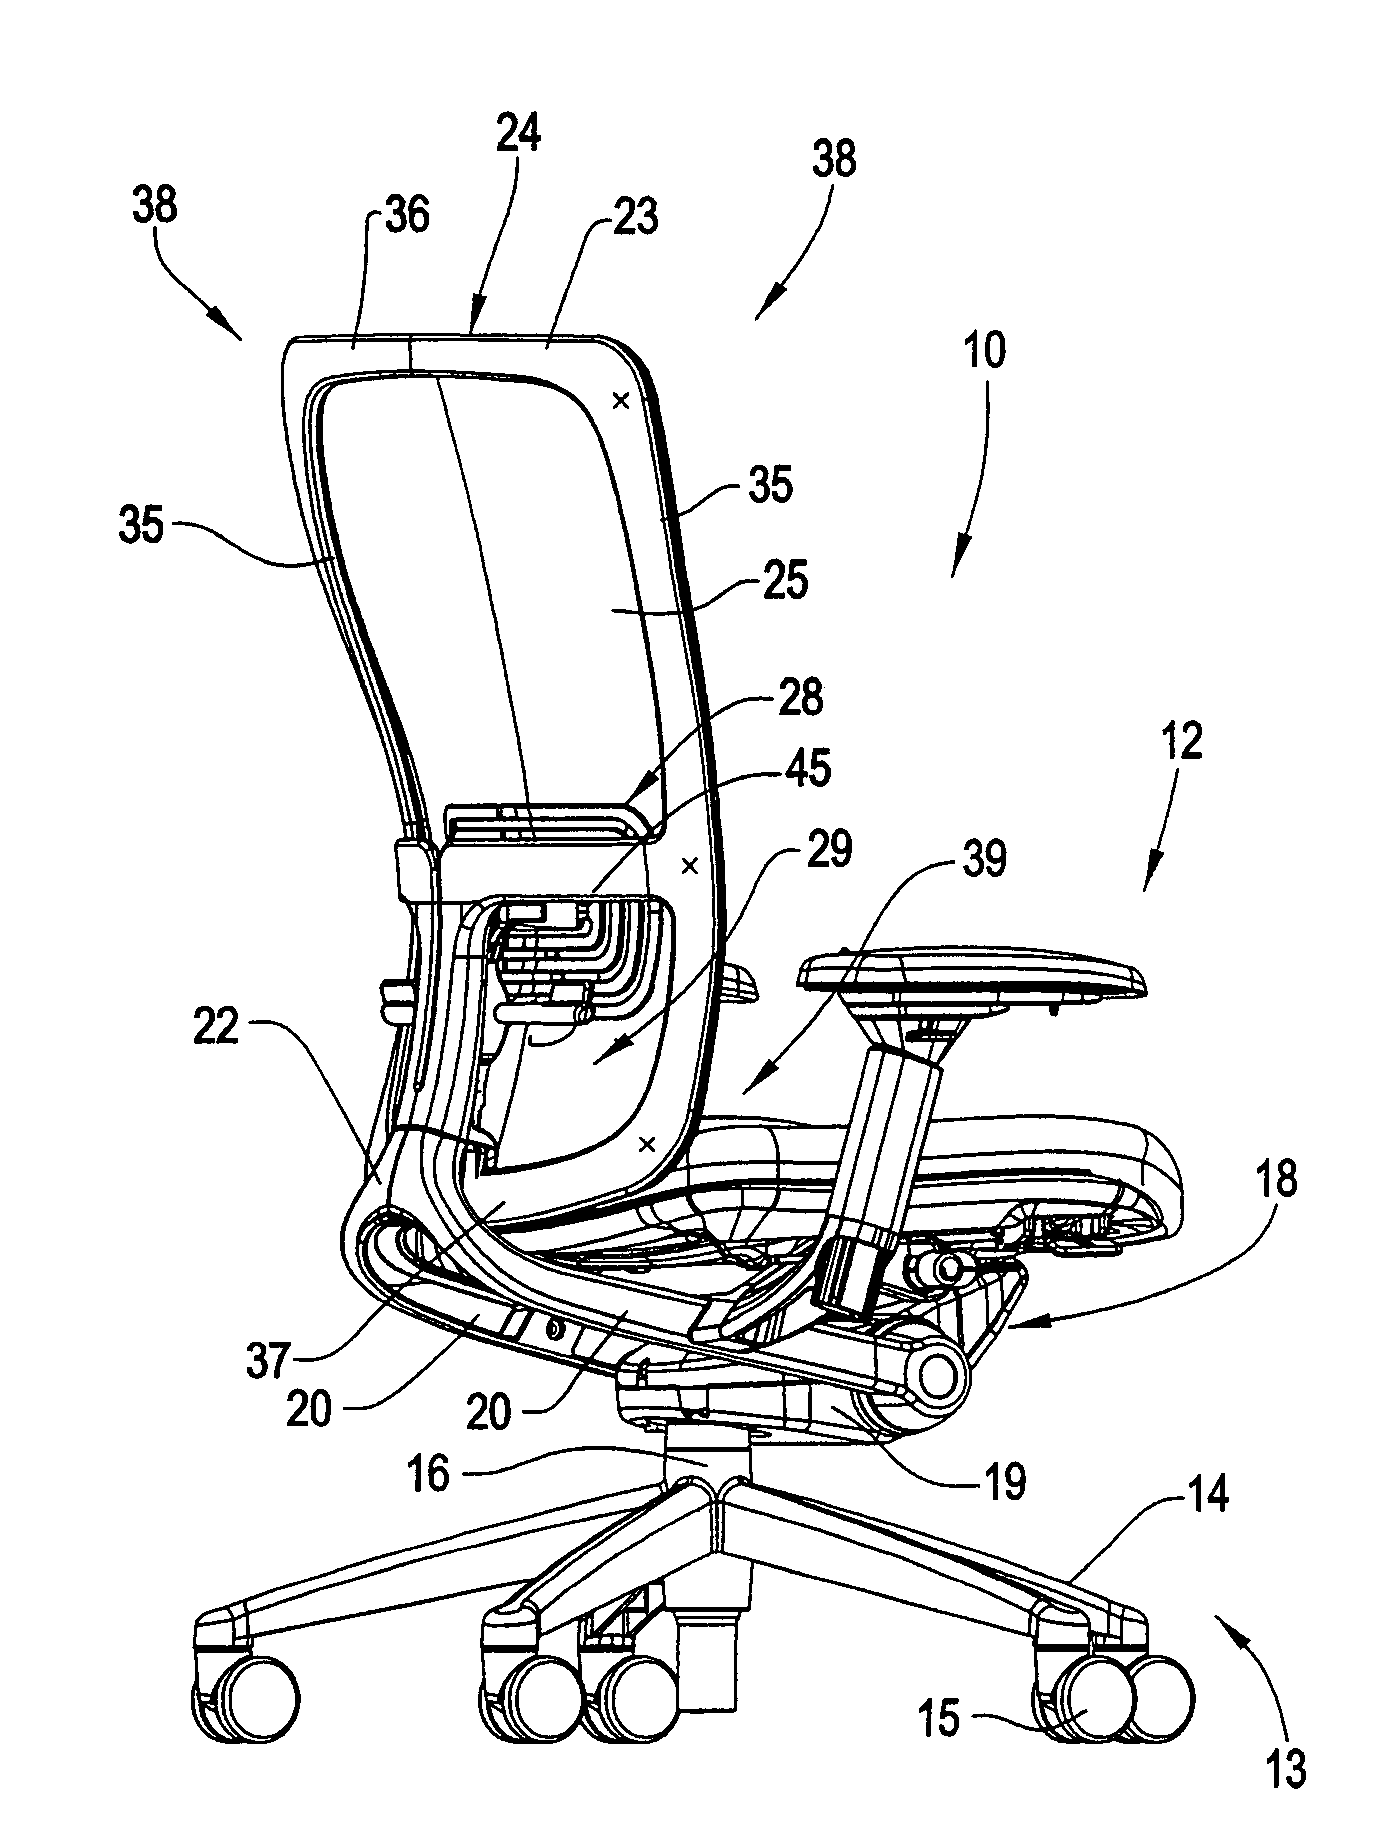 Chair back with lumbar and pelvic supports